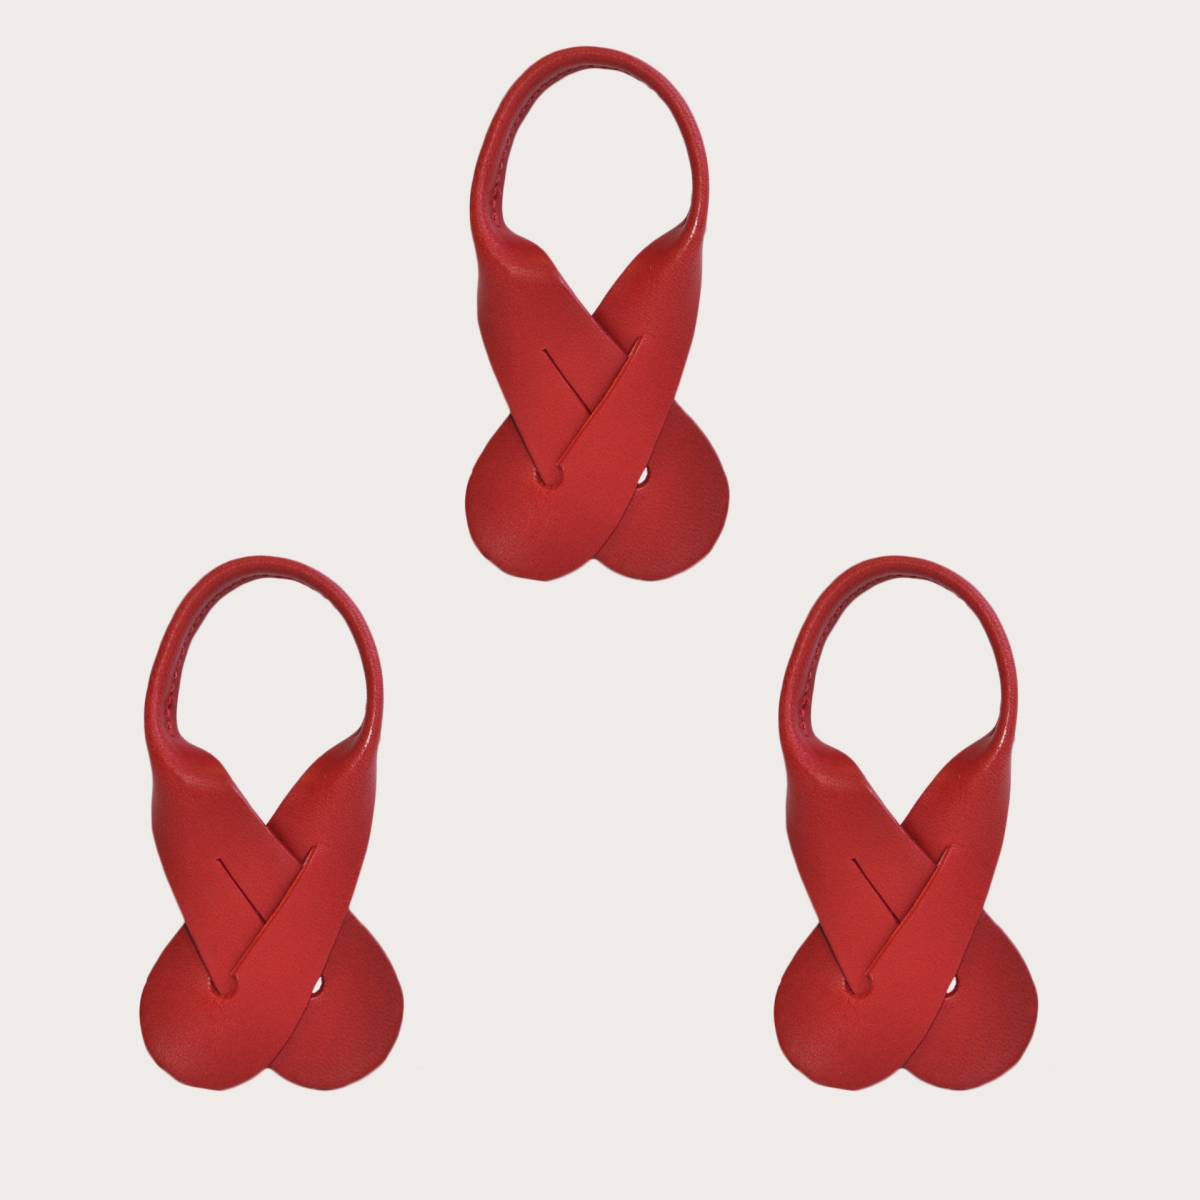 Leather Rounded Connectors for Suspenders, 3pcs. red